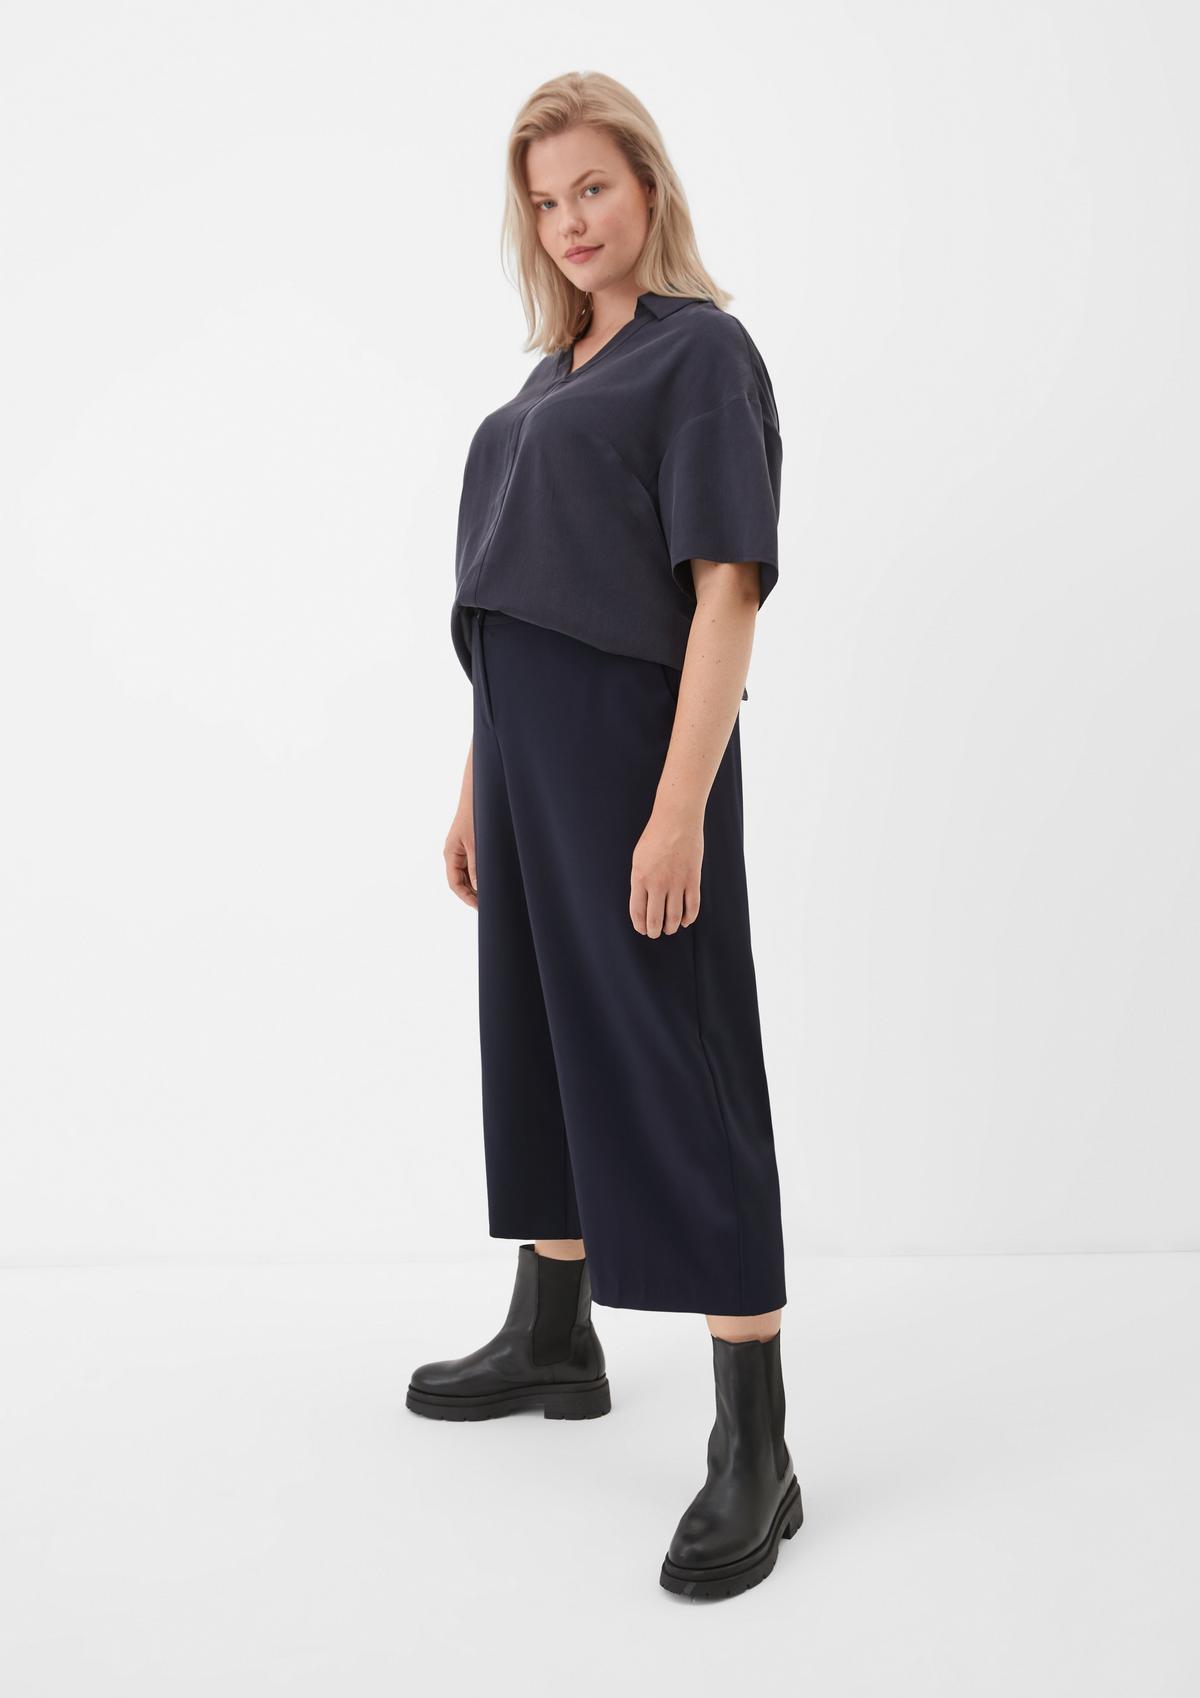 online Culottes: in shop Order now the